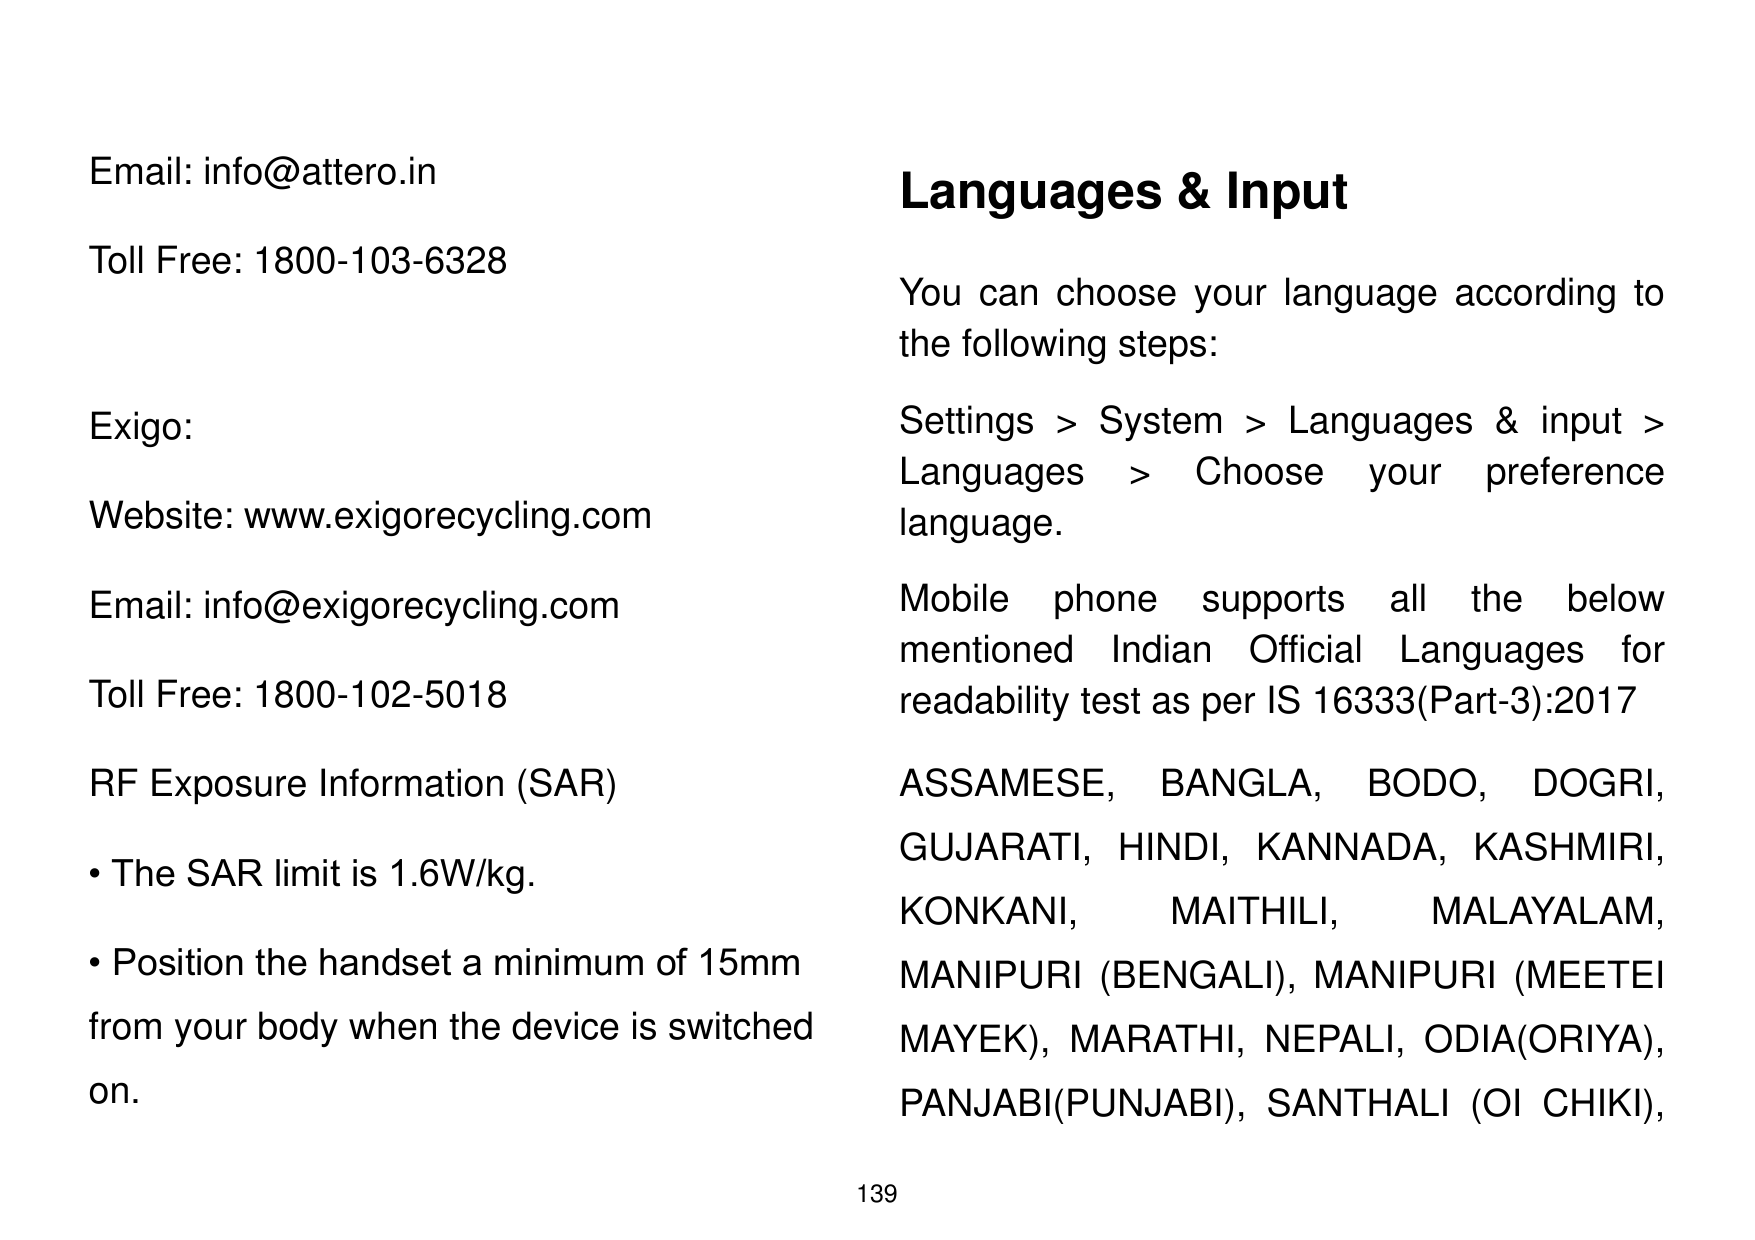 Email: info@attero.inLanguages & InputToll Free: 1800-103-6328You can choose your language according tothe following steps:Setti